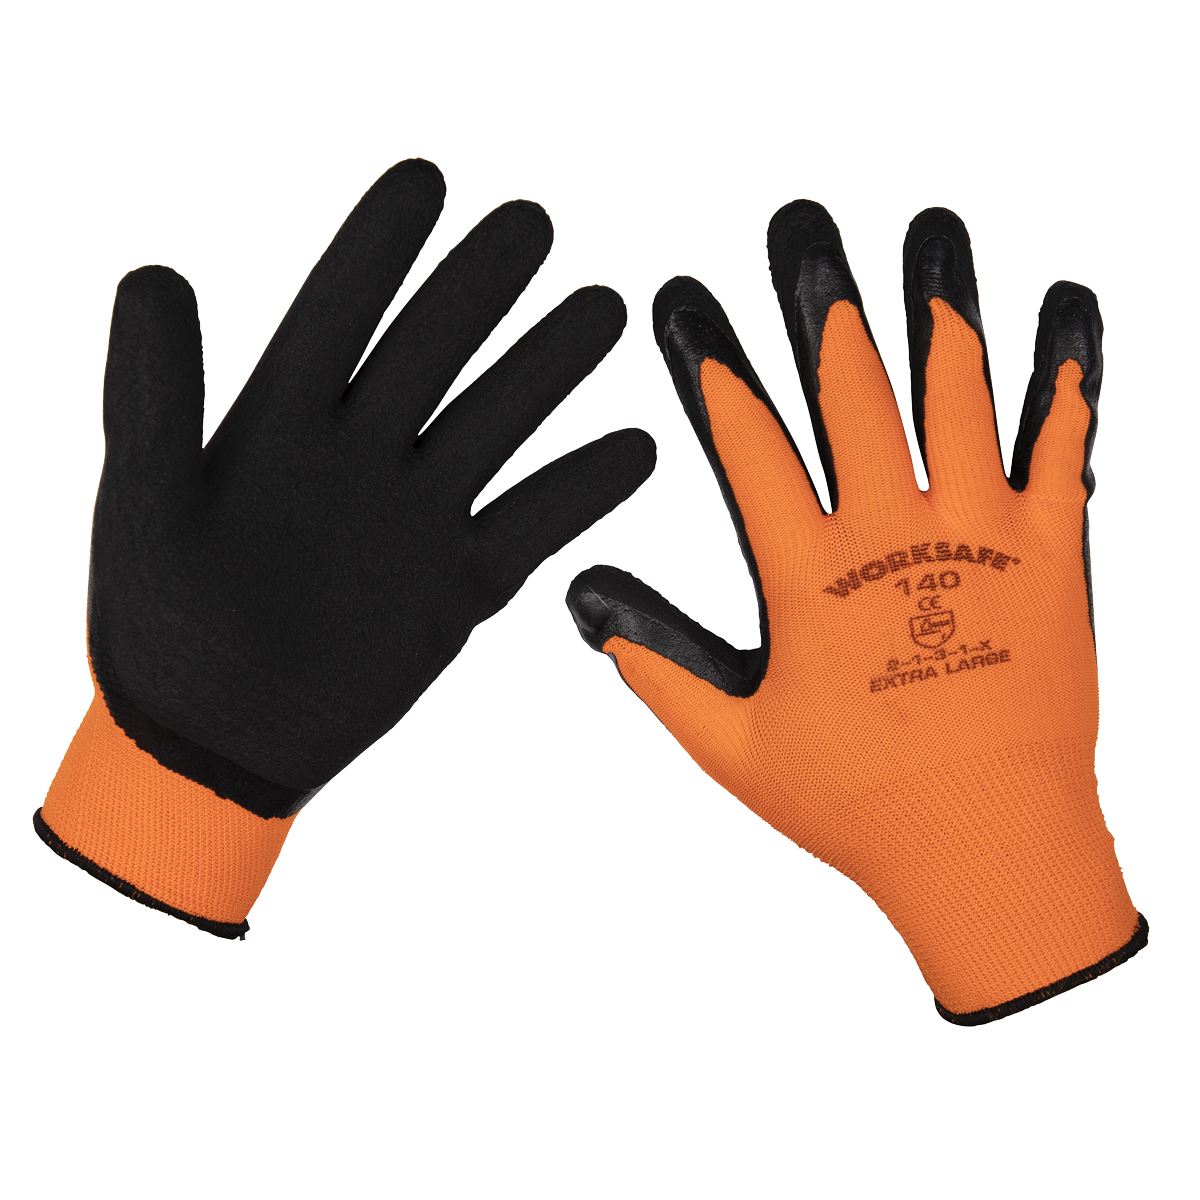 Worksafe by Sealey Foam Latex Gloves (X-Large) - Pack of 6 Pairs